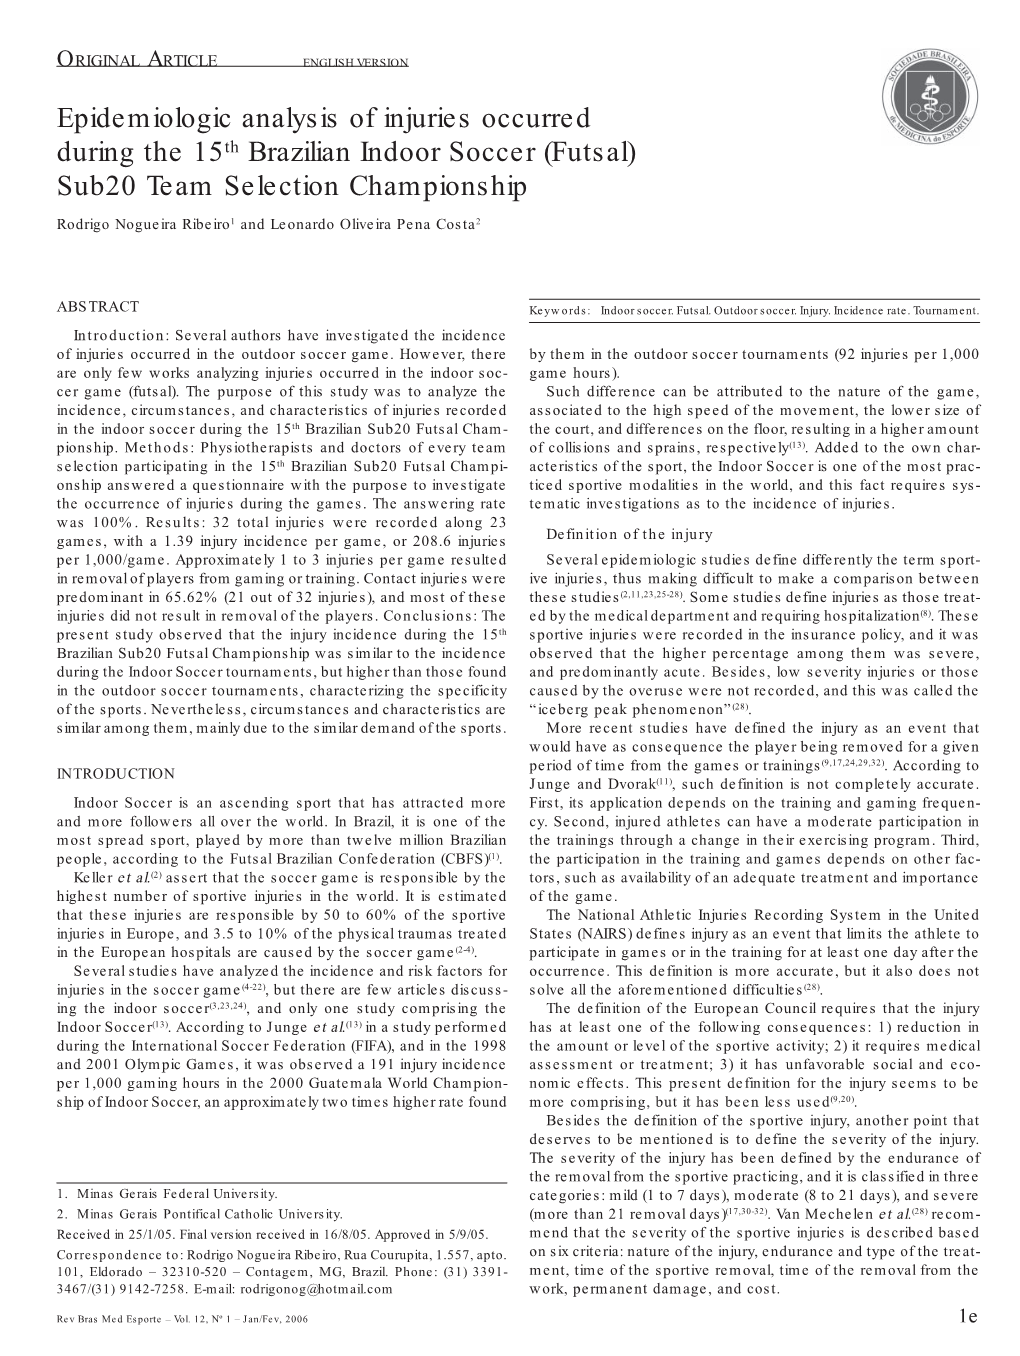 Epidemiologic Analysis of Injuries Occurred During the 15Th Brazilian Indoor Soccer (Futsal) Sub20 Team Selection Championship